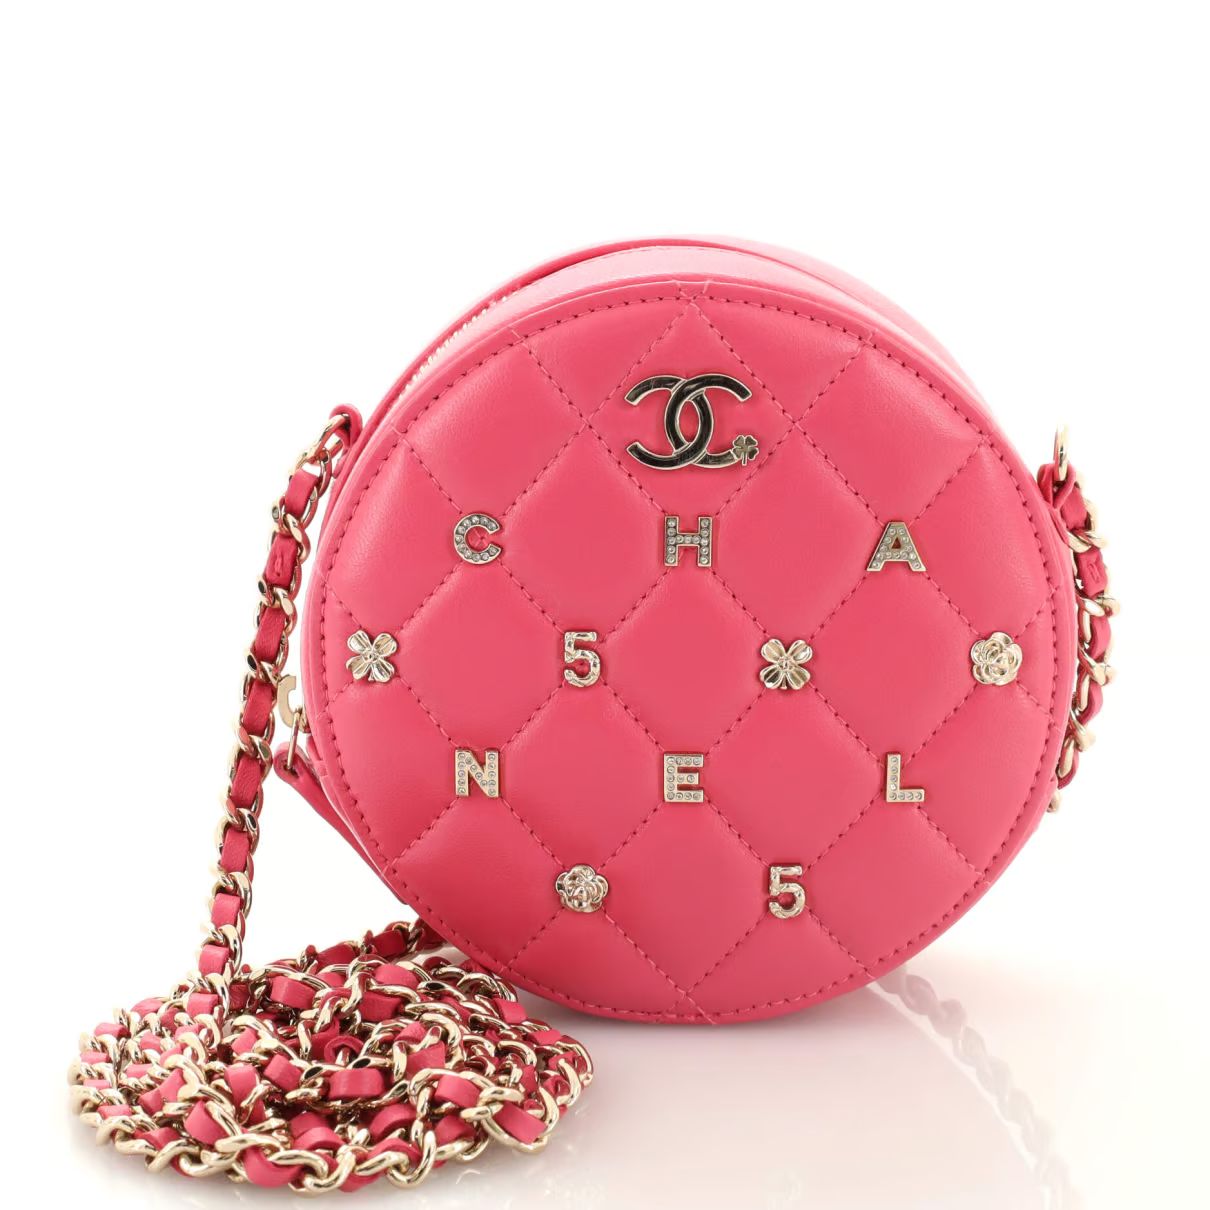 Chanel Handbags | Buy or Sell Designer bags for women - Vestiaire Collective | Vestiaire Collective (Global)